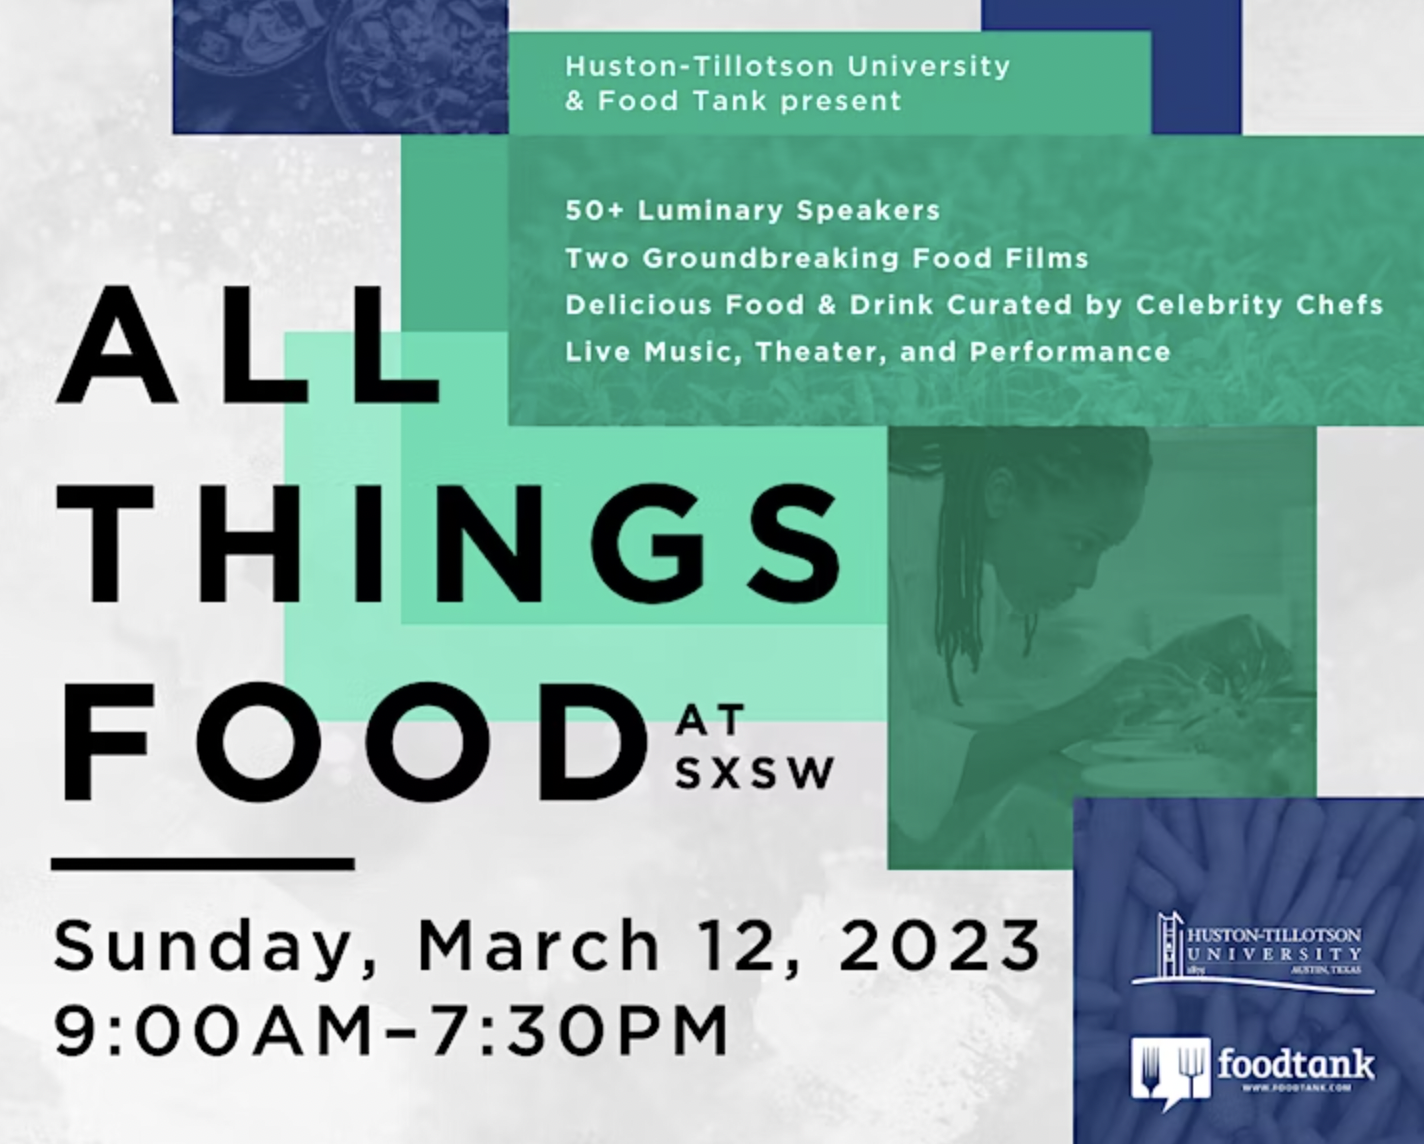 All Things Food at SXSW with Food Tank